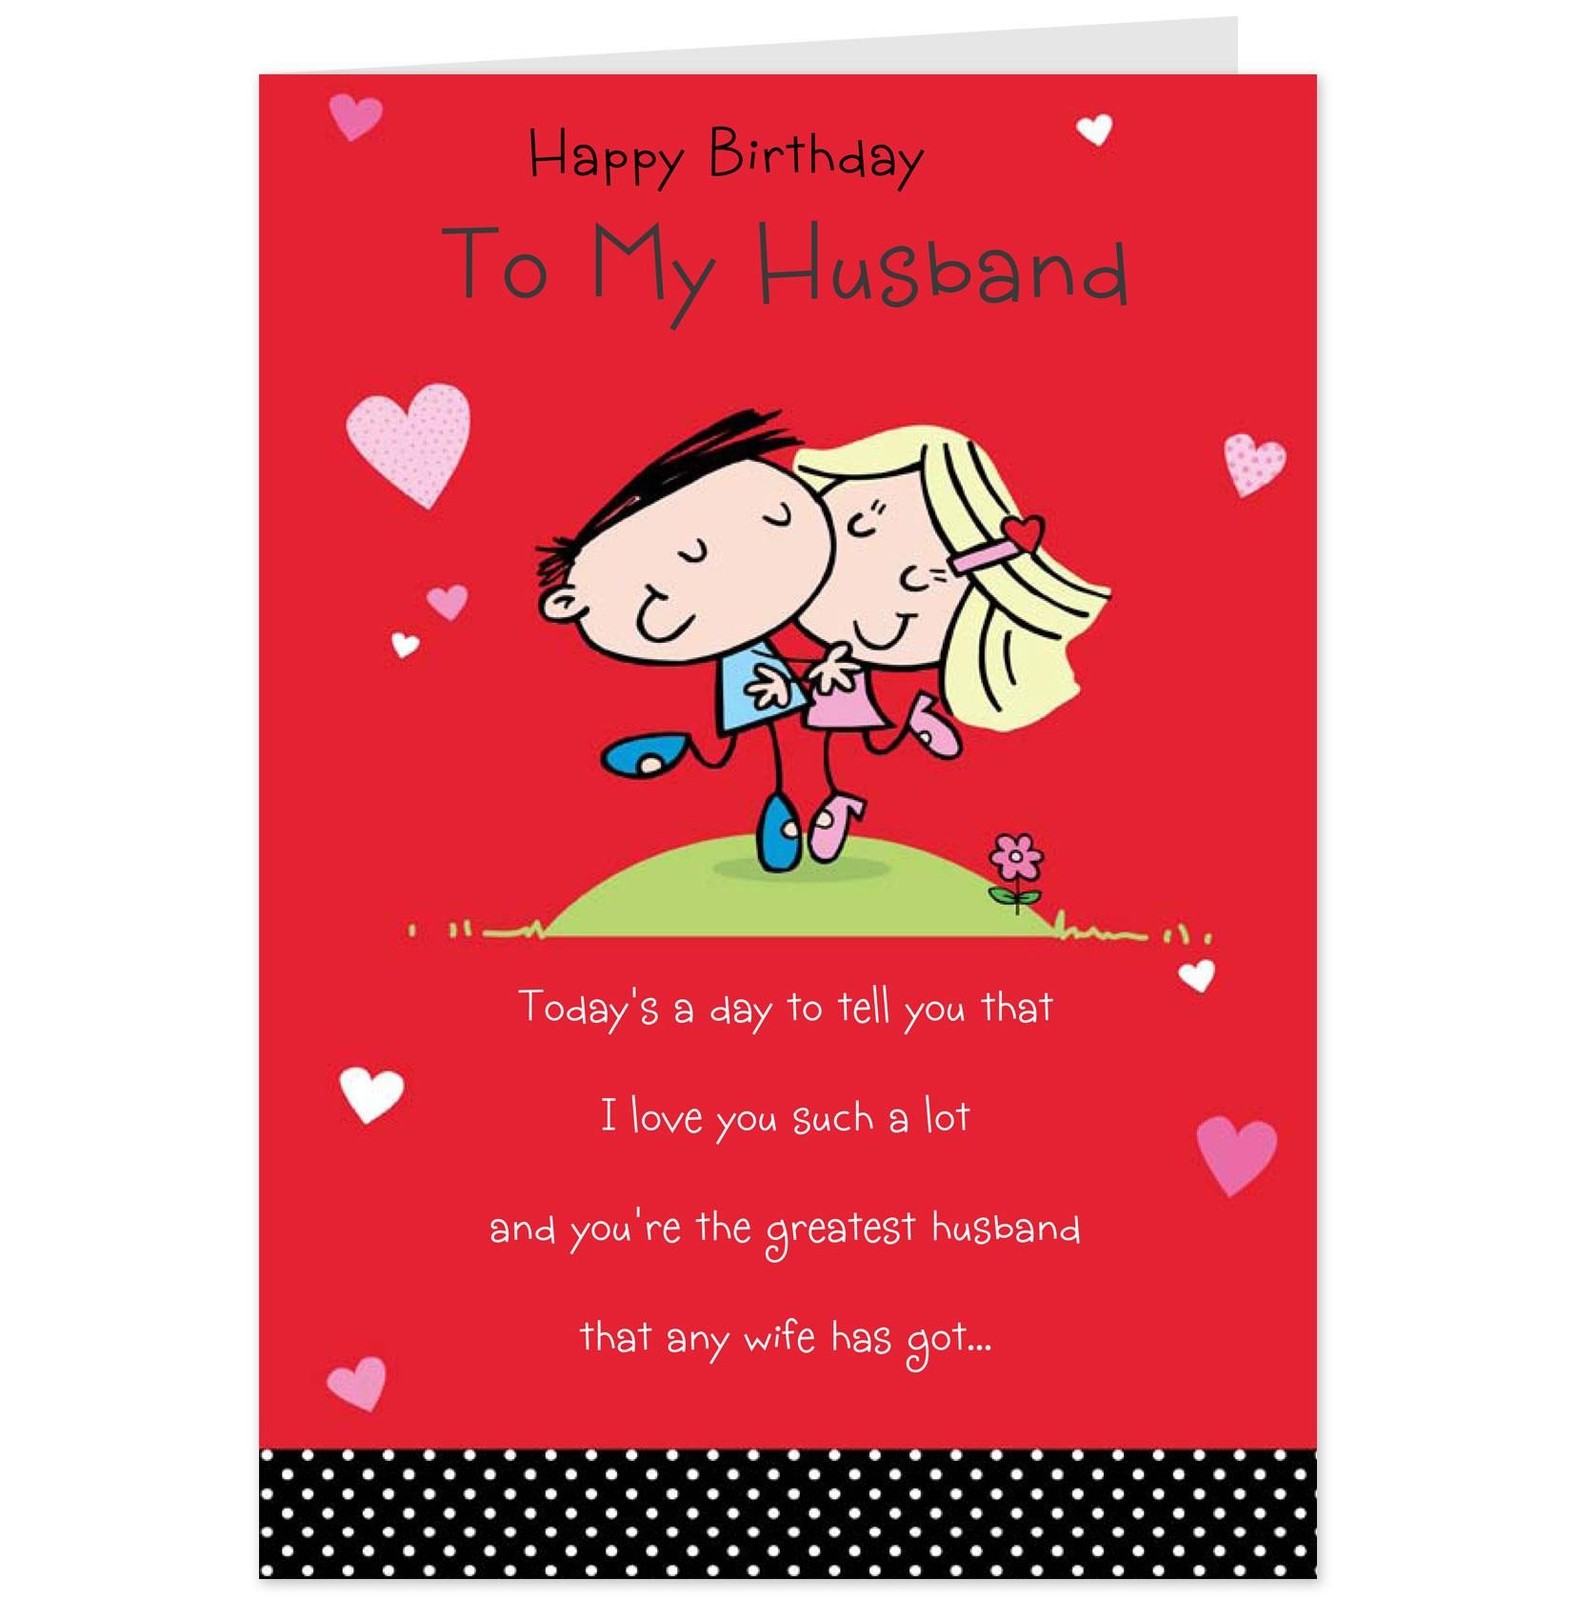 Romantic happy birthday wishes for Husband.